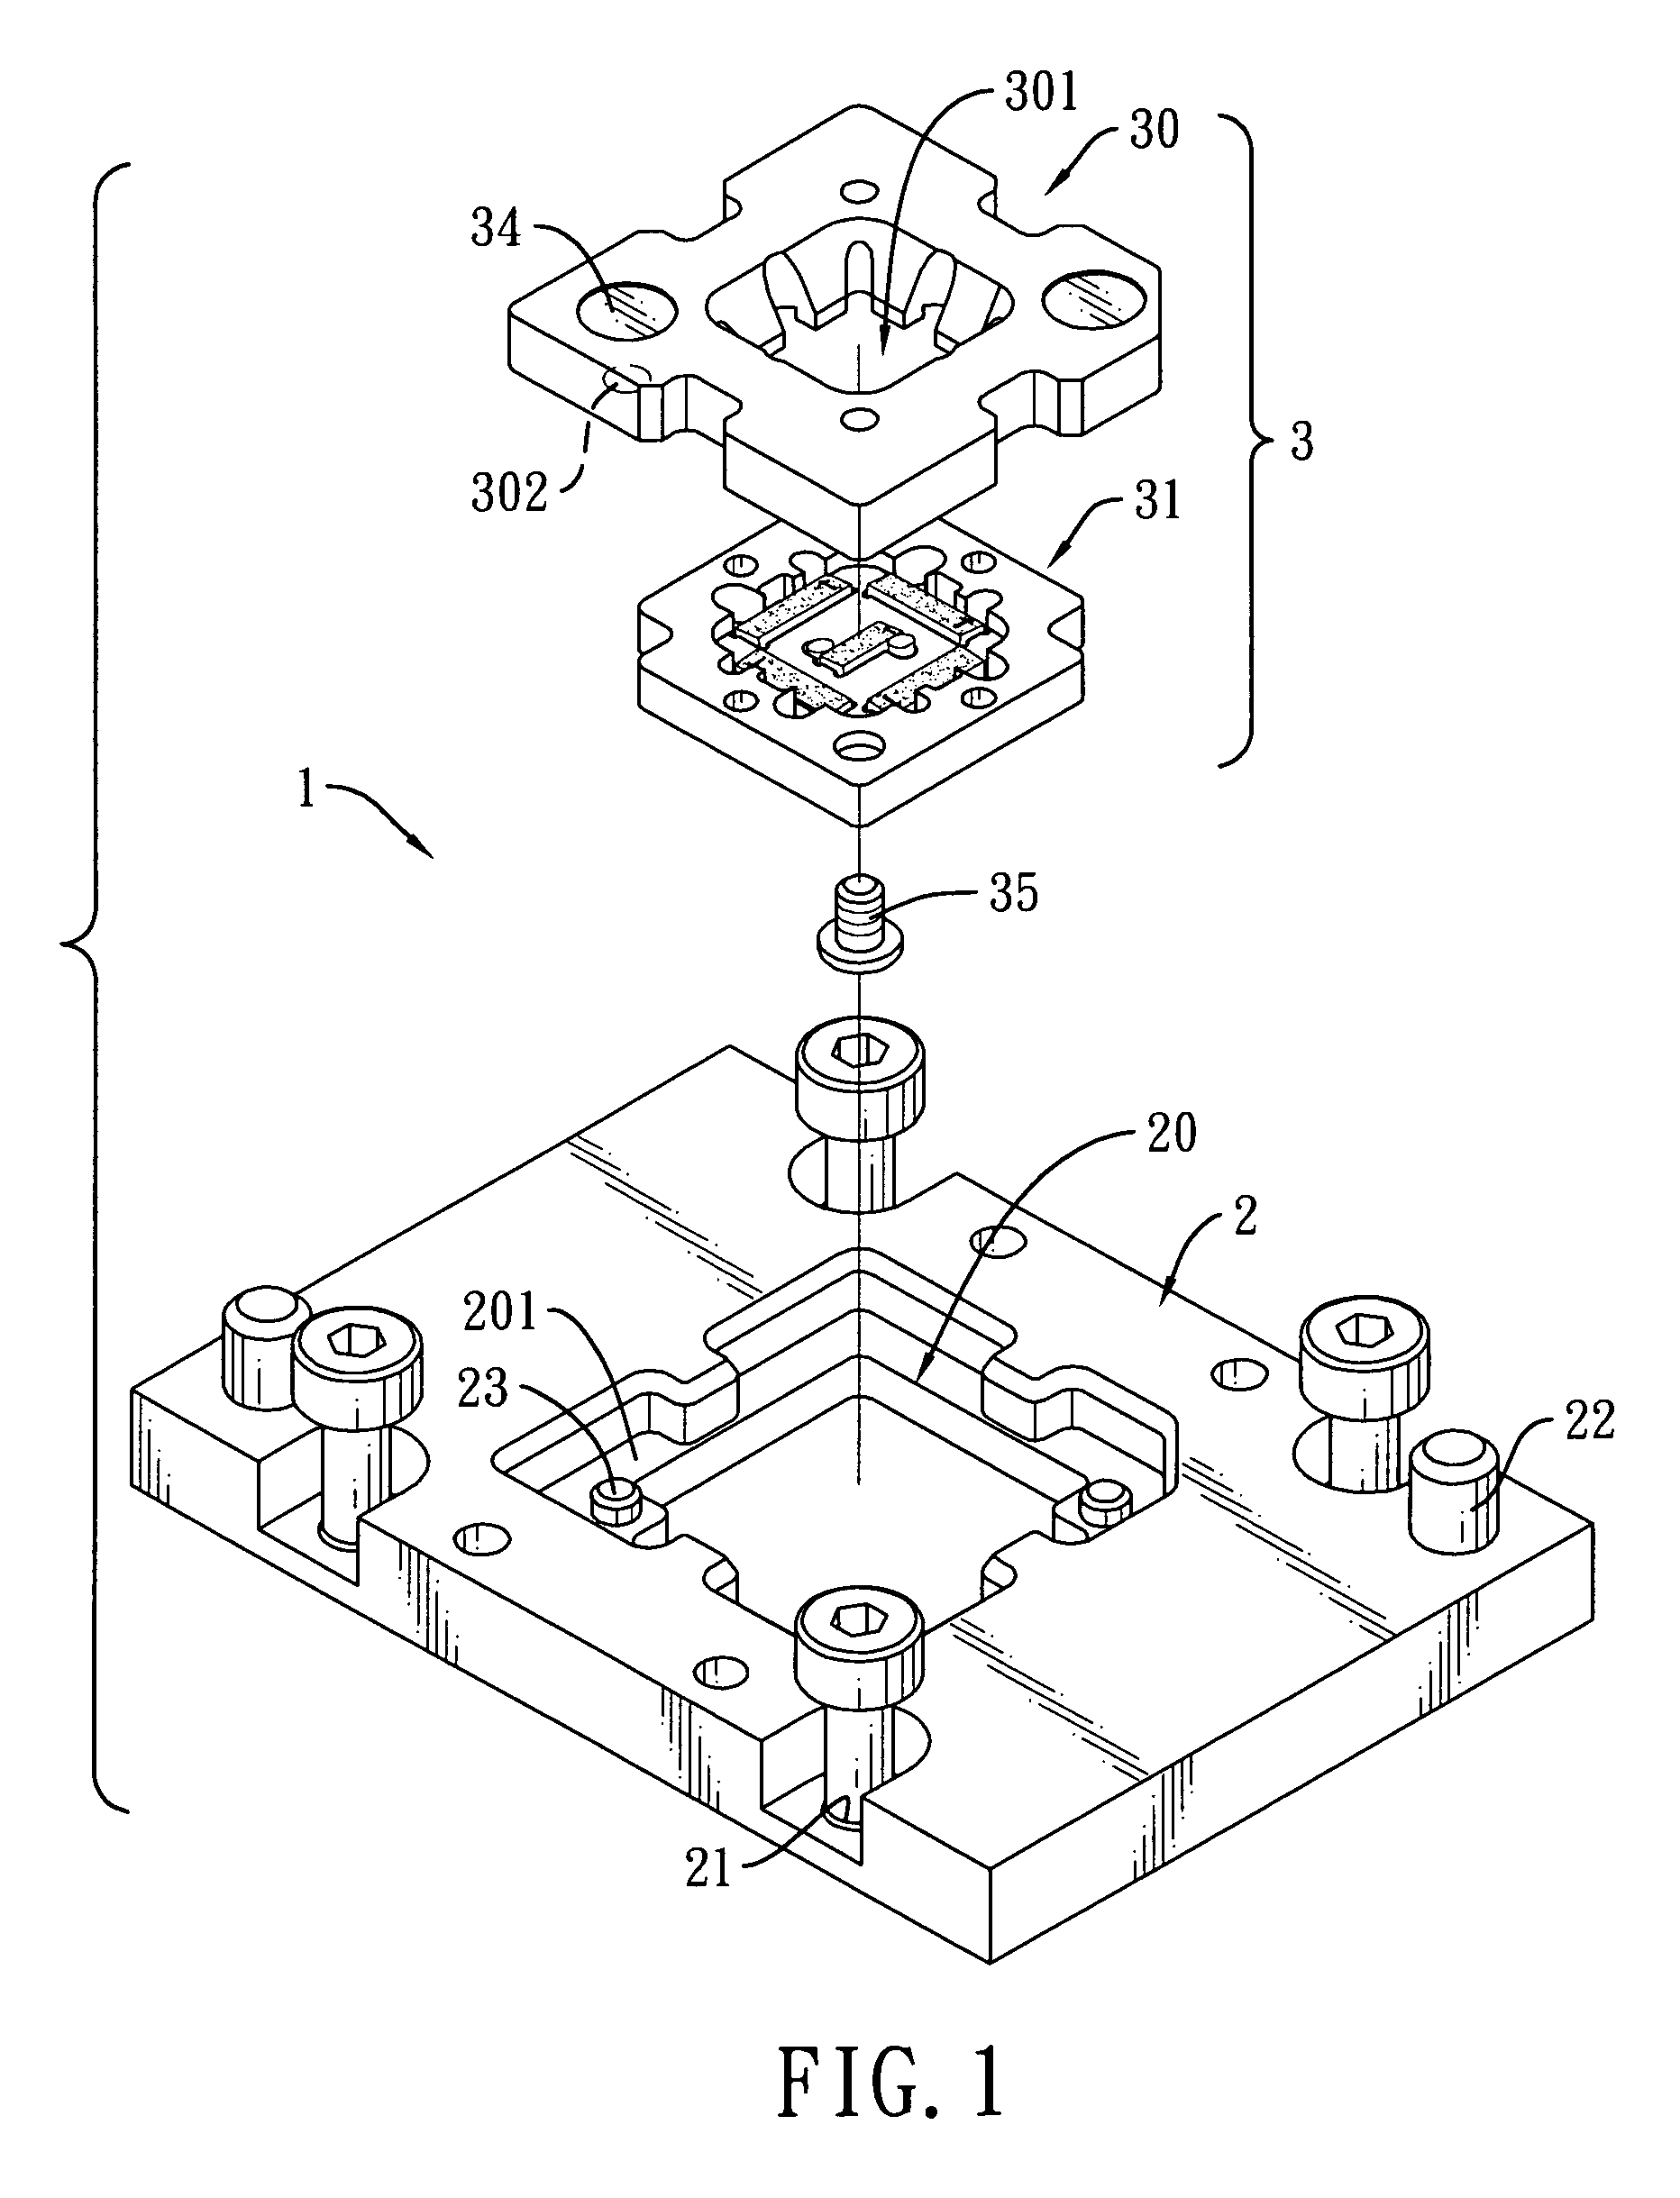 Test socket with a rapidly detachable electrical connection module